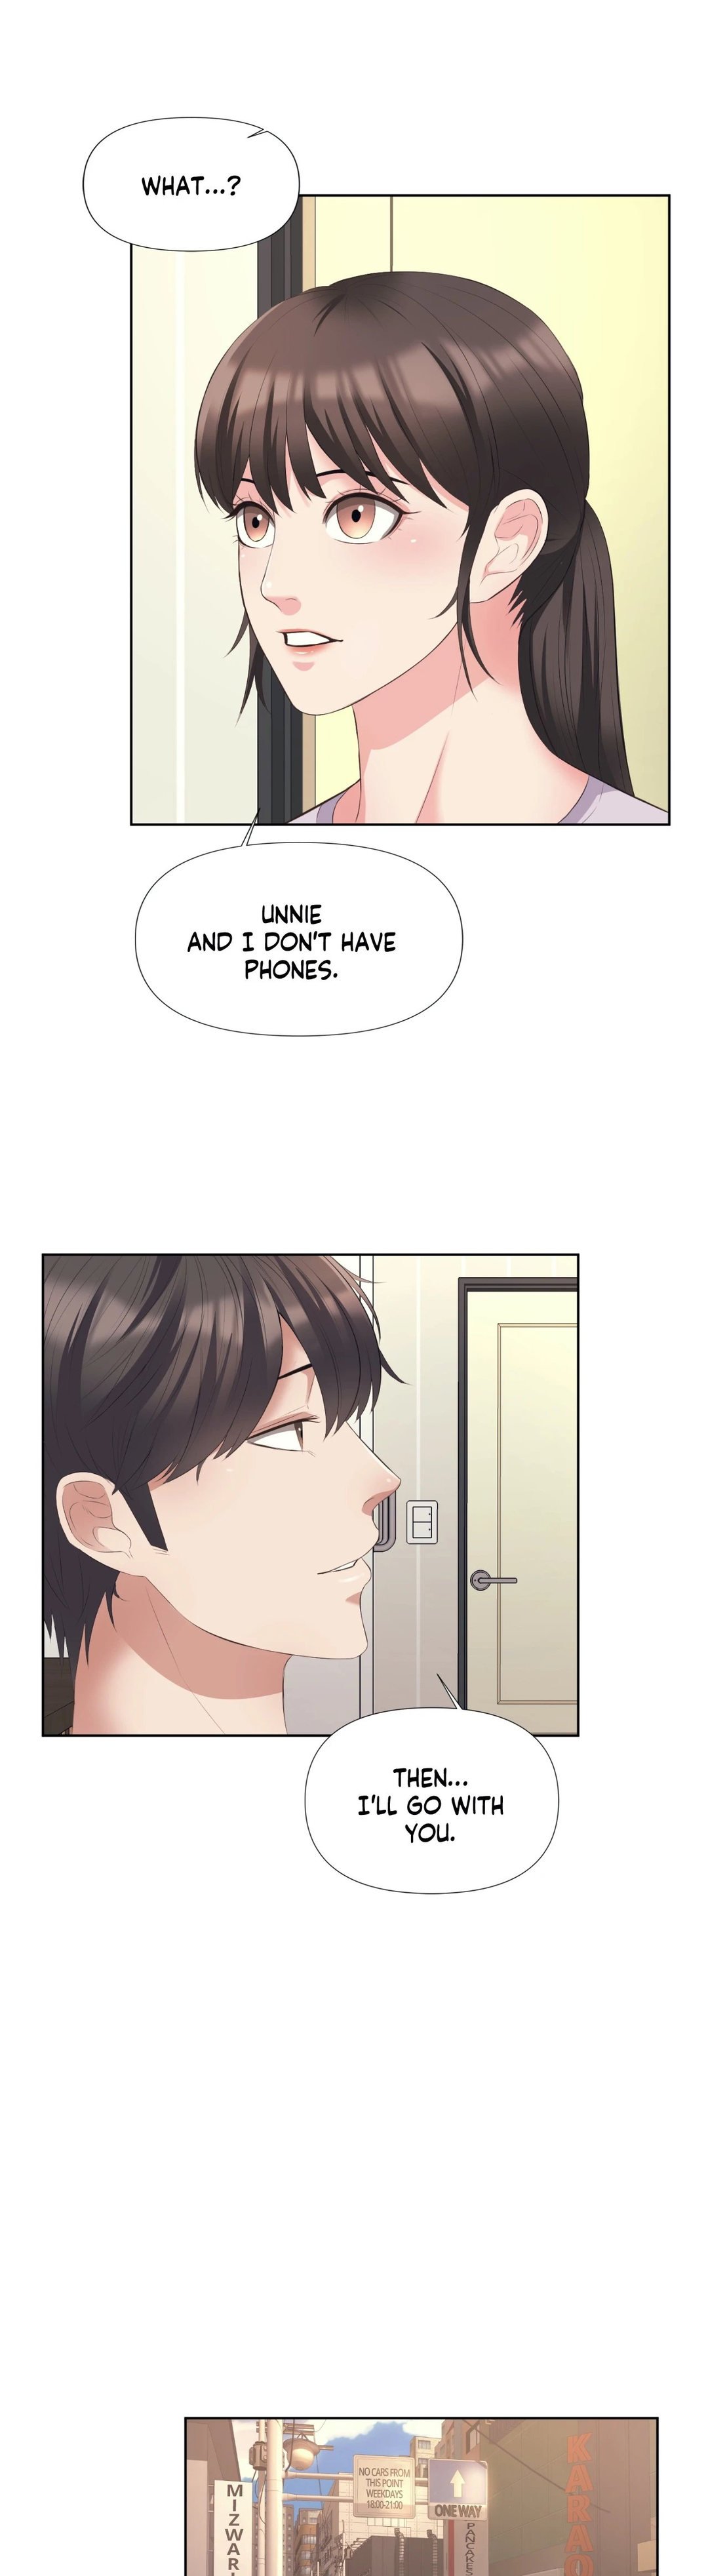 roommates-with-benefits-chap-8-19